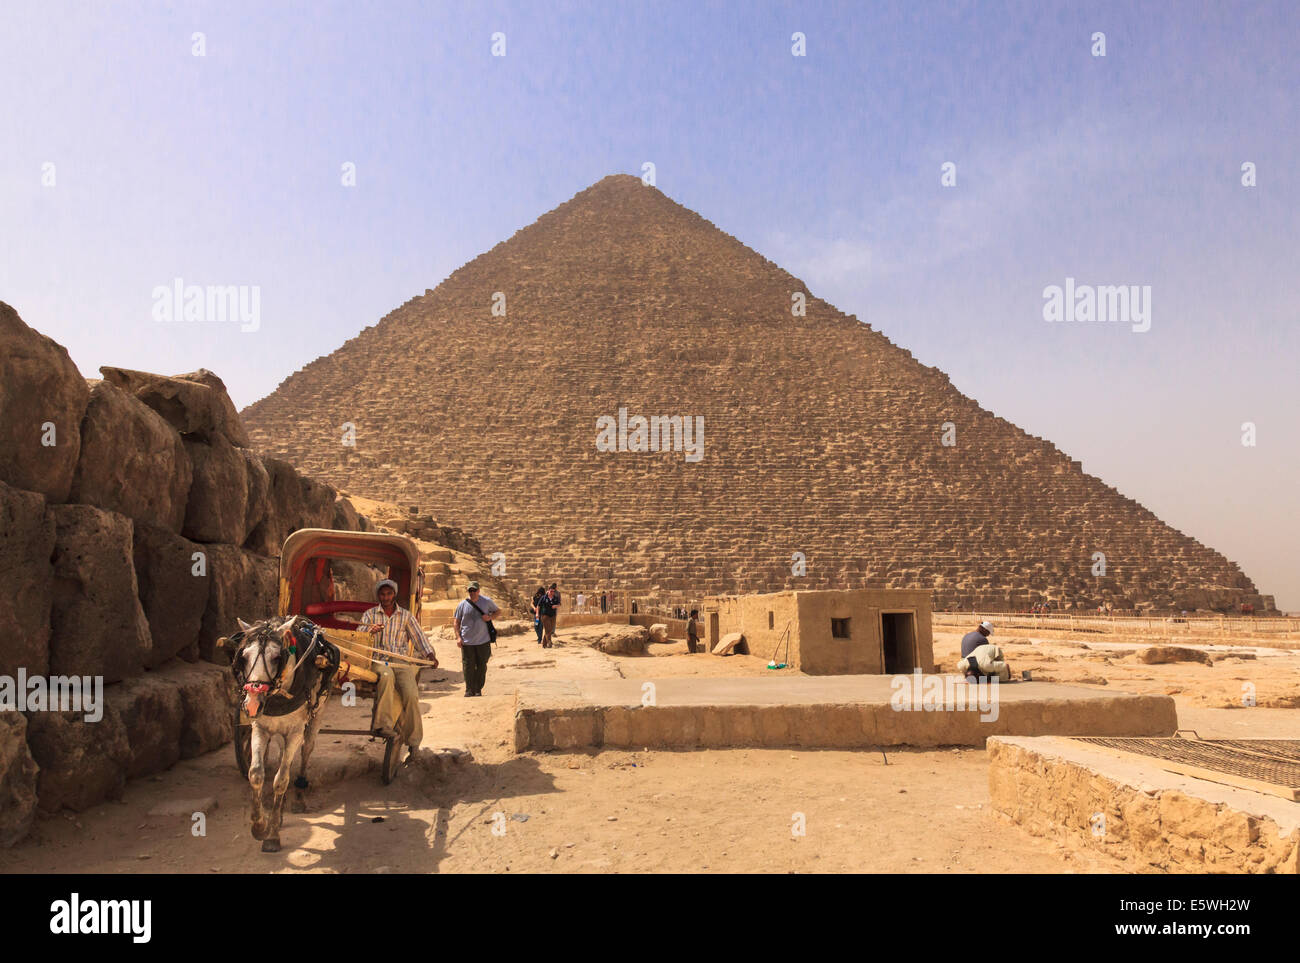 Great Pyramid of Giza in Cairo, Egypt - Great Pyramids of Giza, with horse and cart waiting for tourists Stock Photo